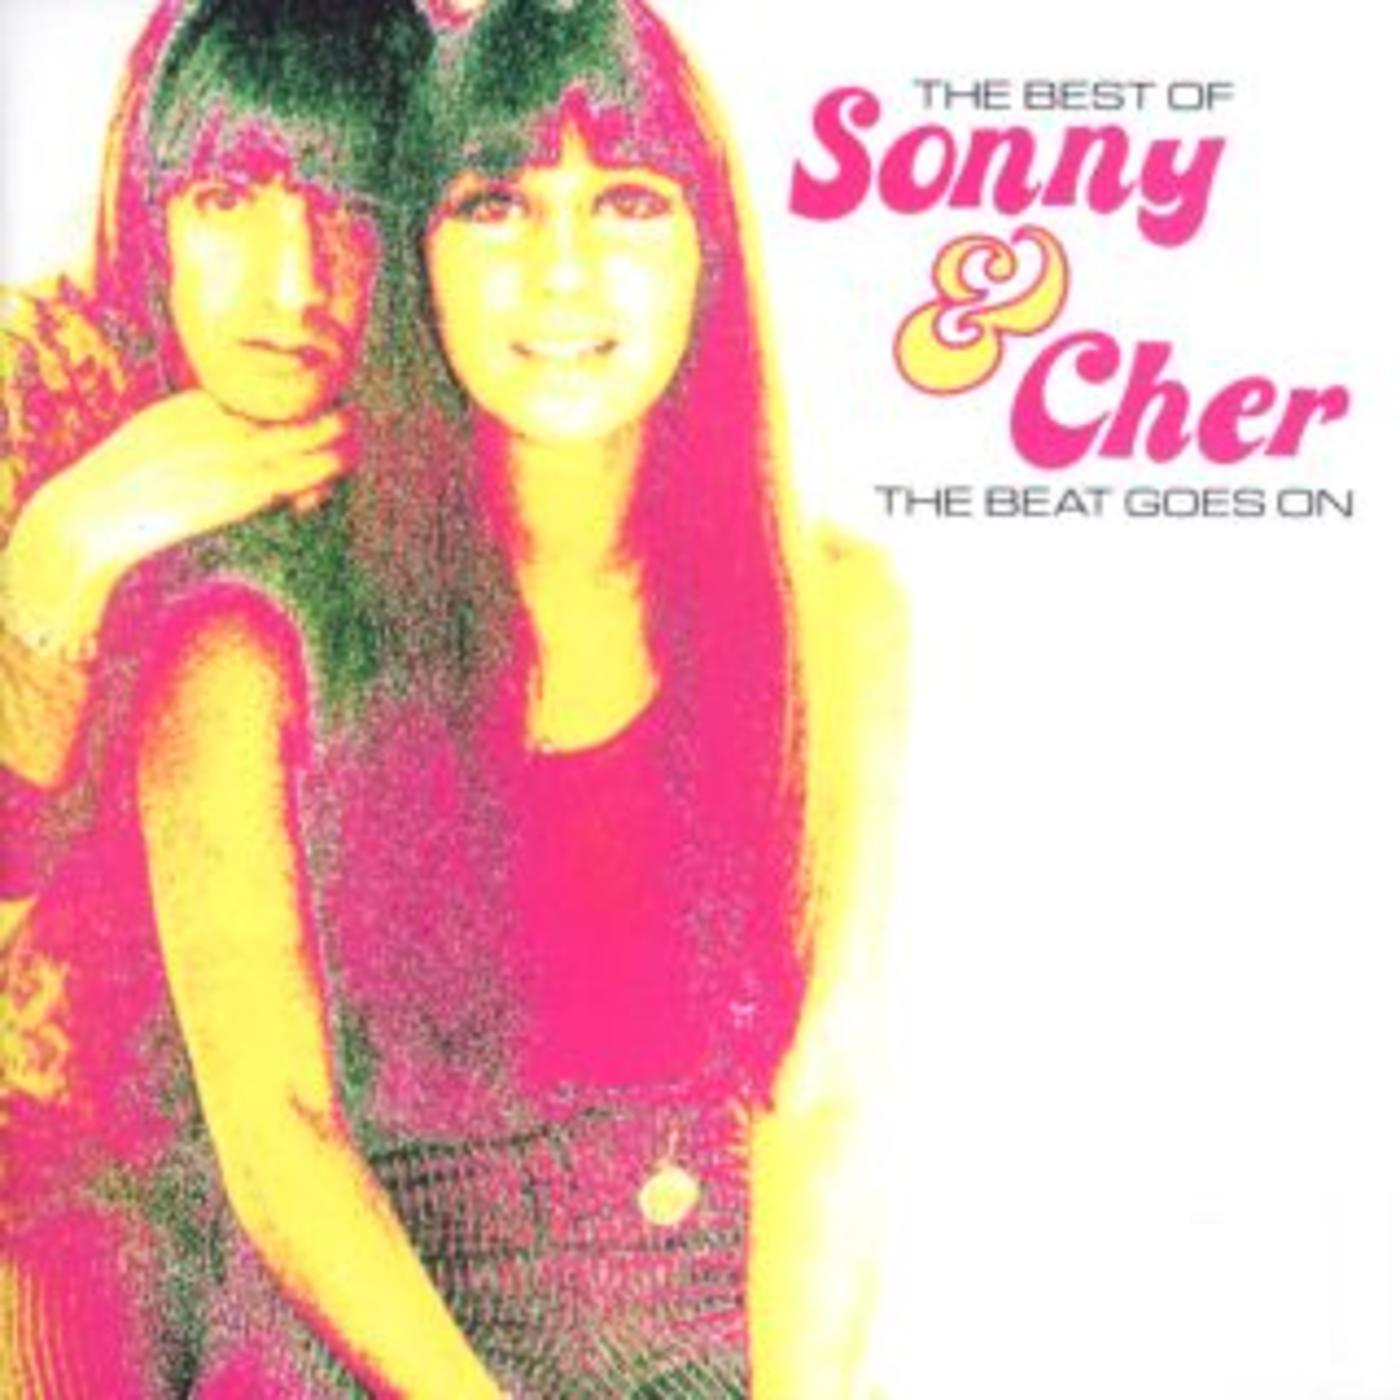 Sonny & Cher - The Best Of & Cher: The Beat Goes On |